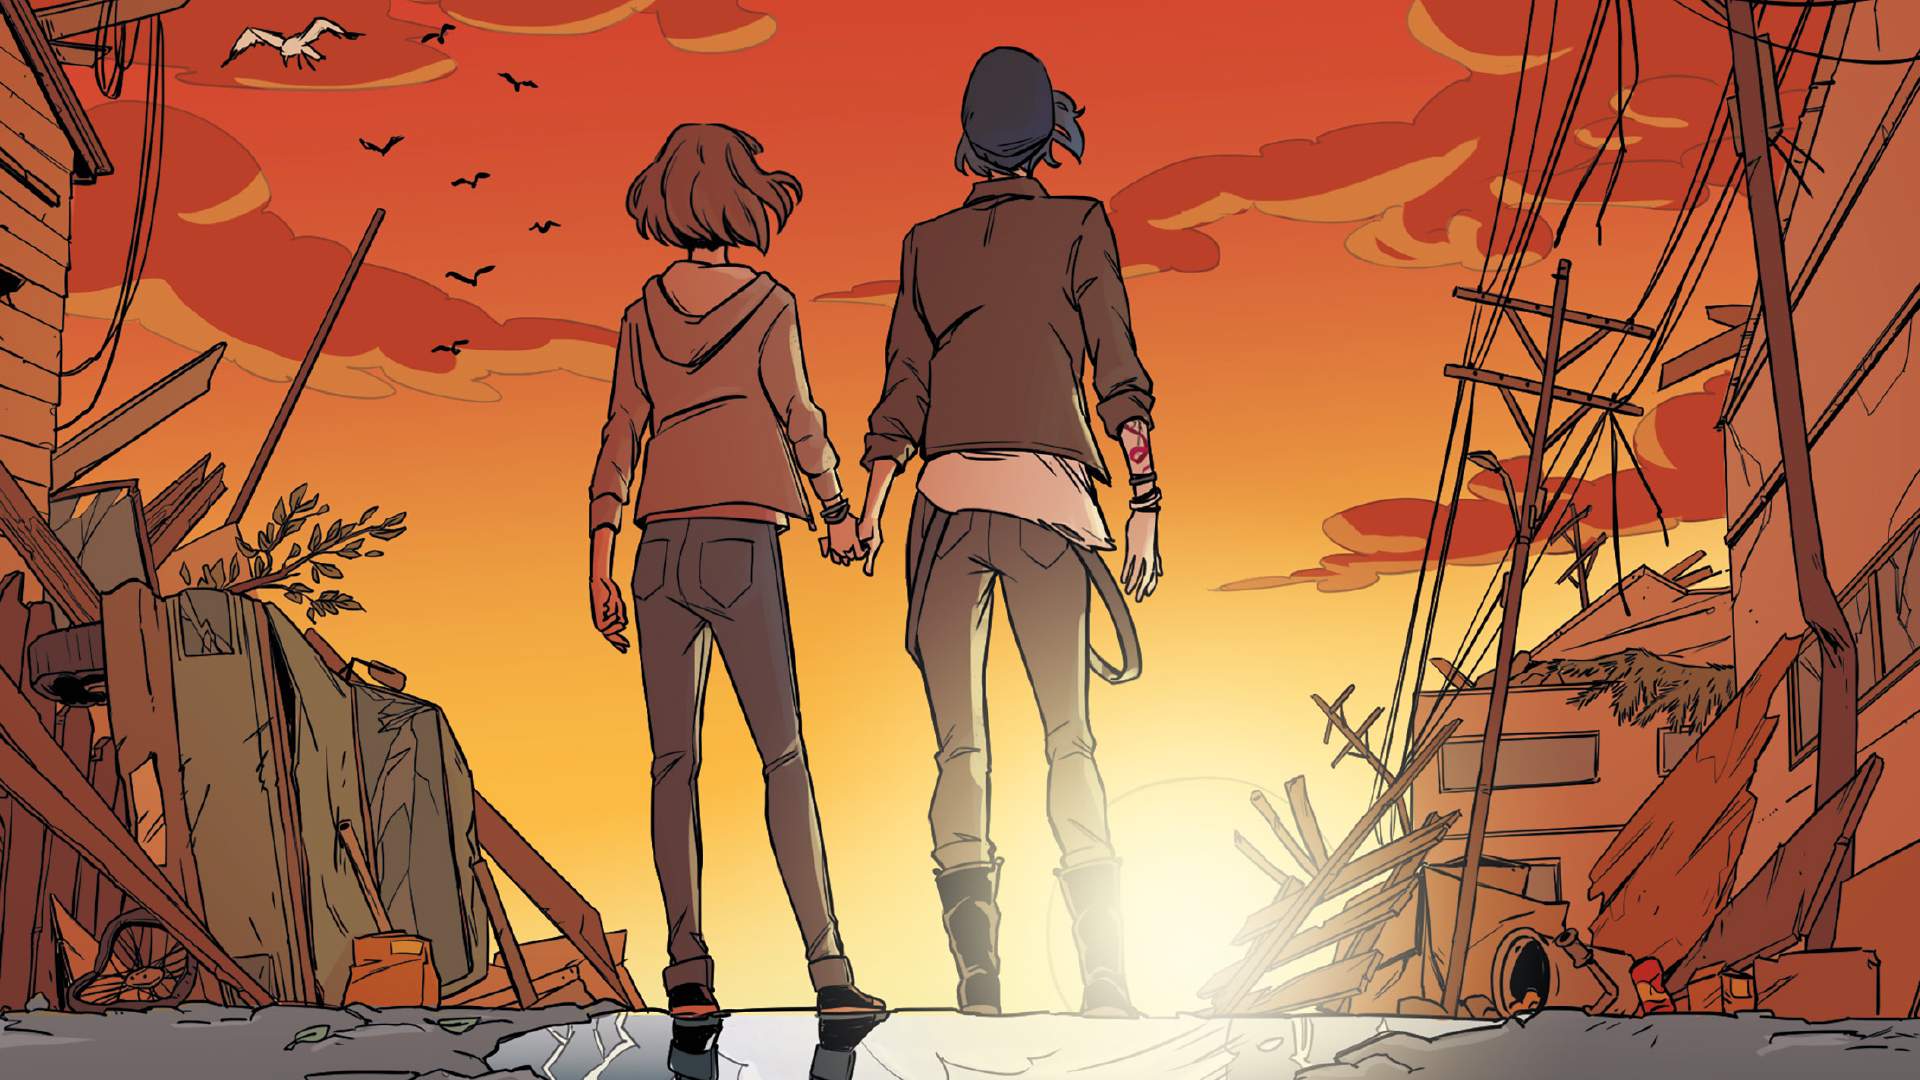 Max and Chloe's story continues - a look at the Life is Strange comic book